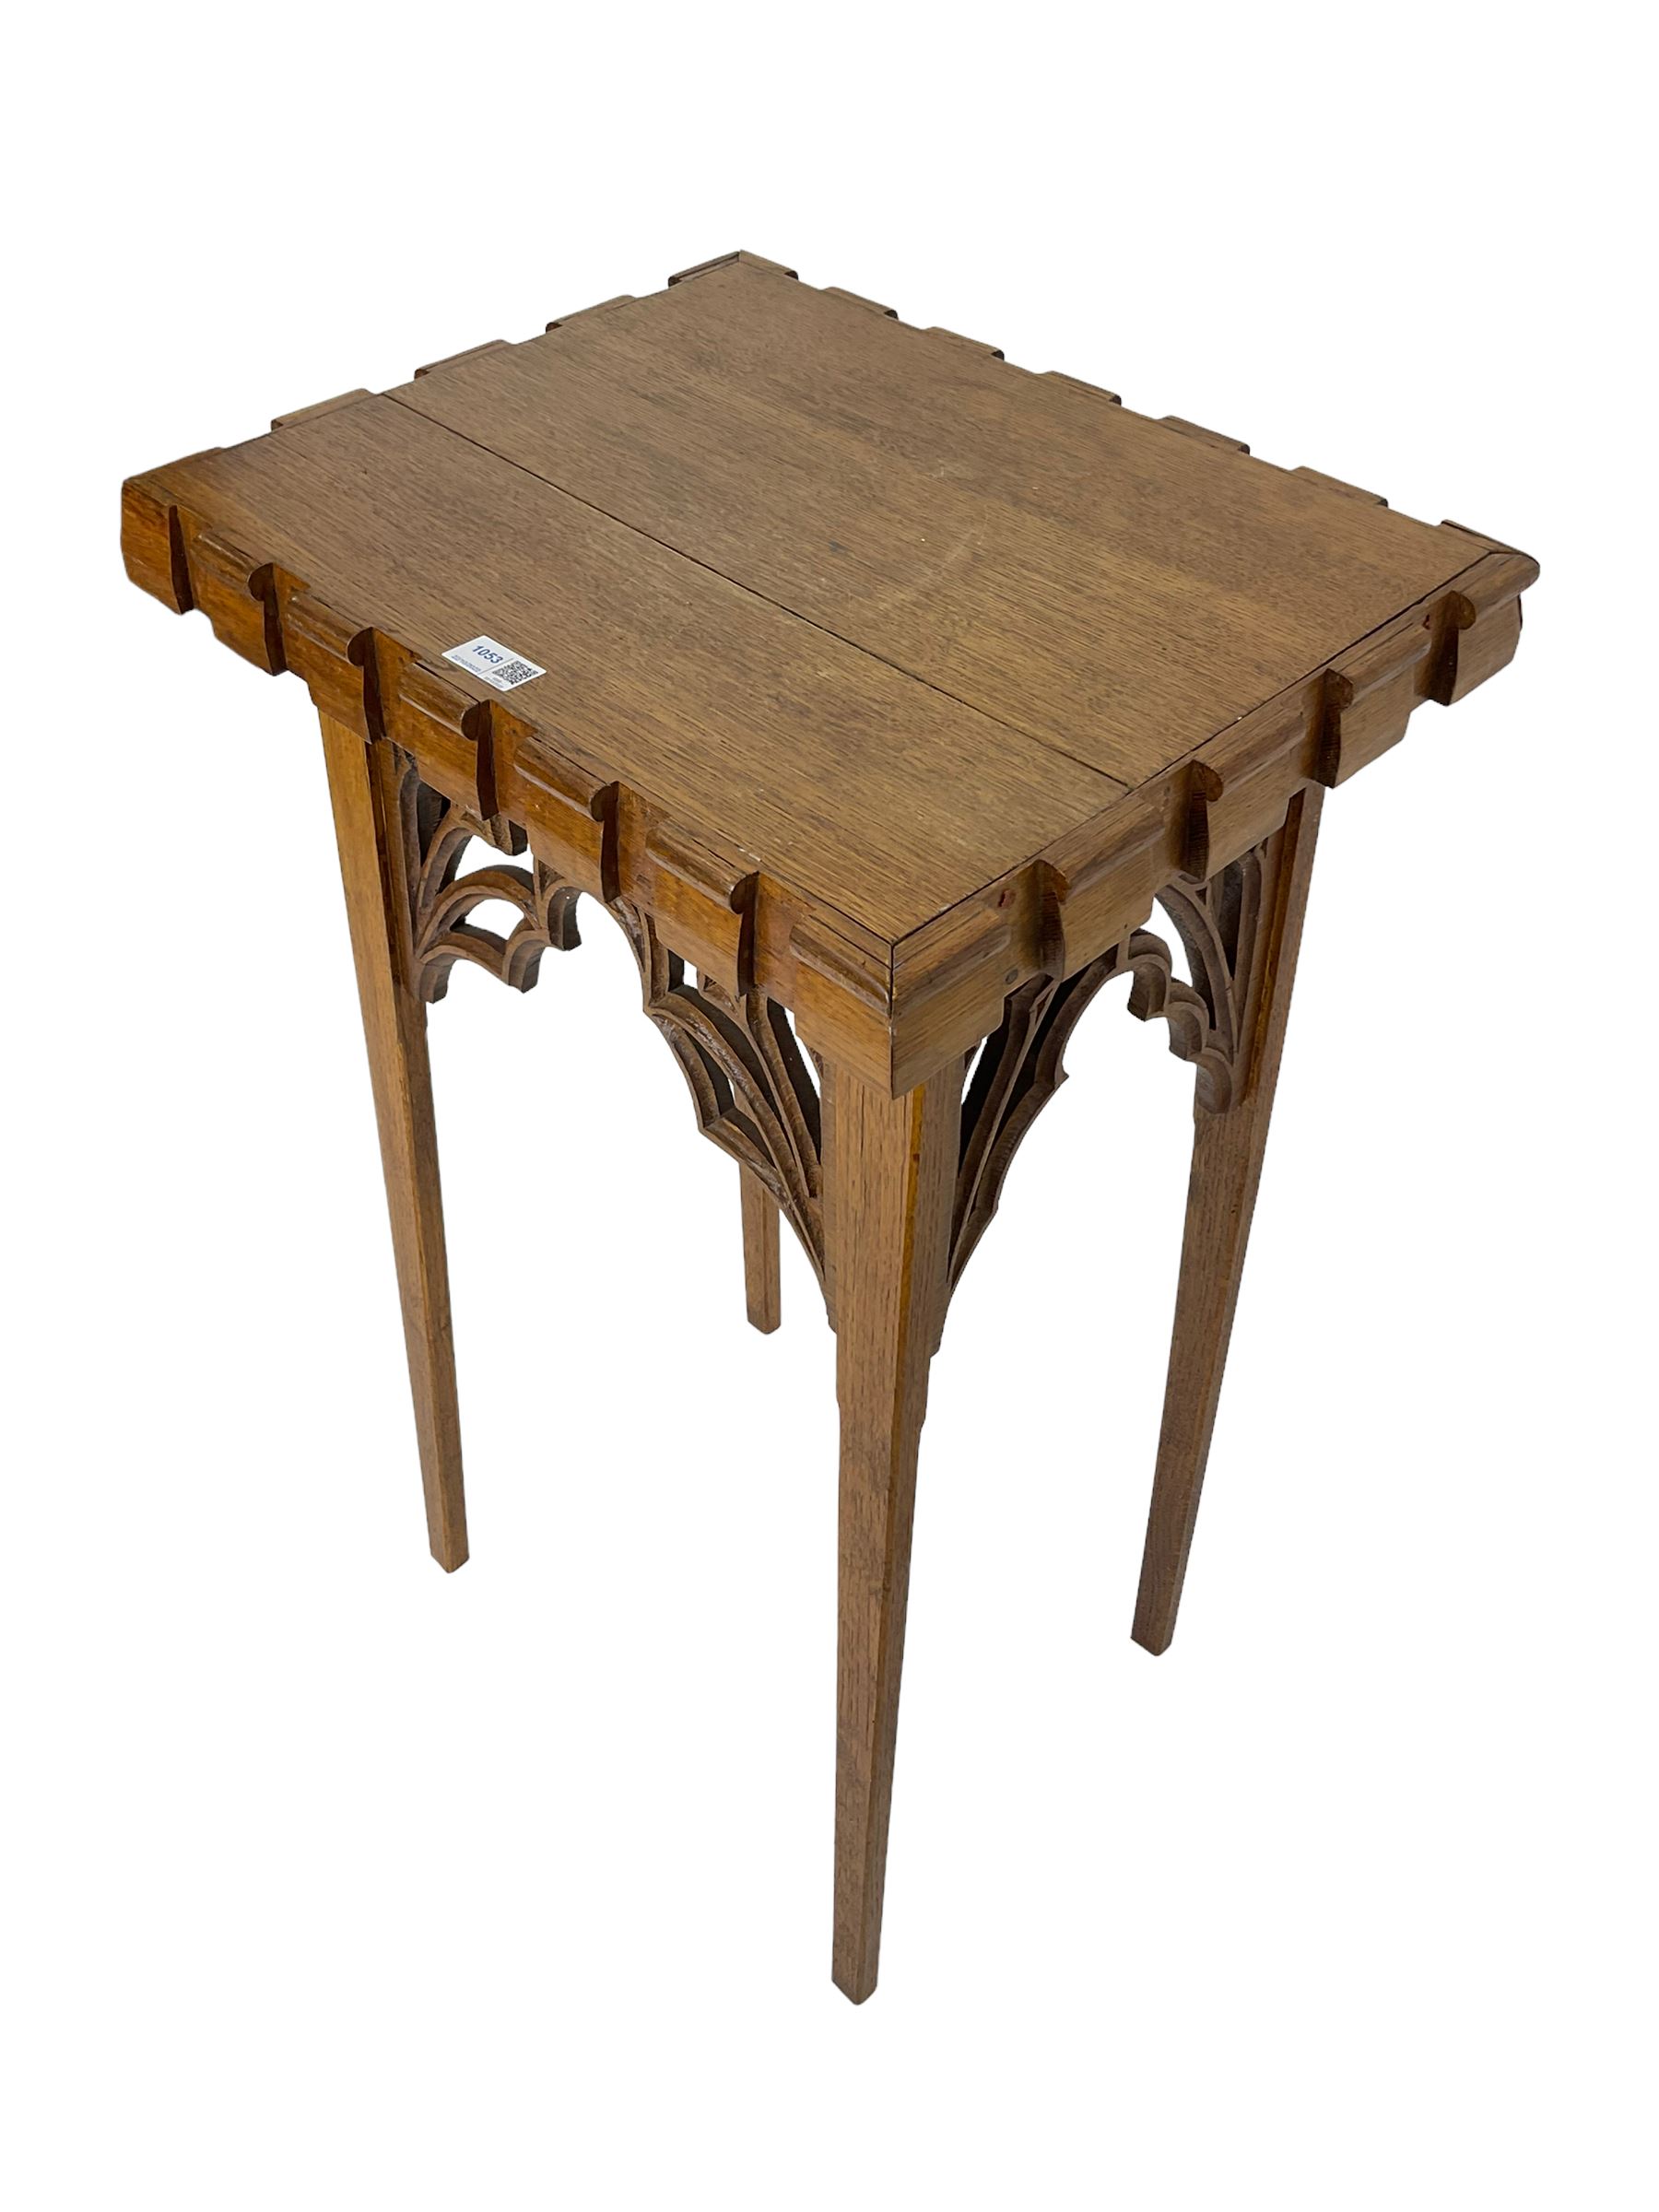 20th century ecclesiastical Gothic style oak stand - Image 6 of 6